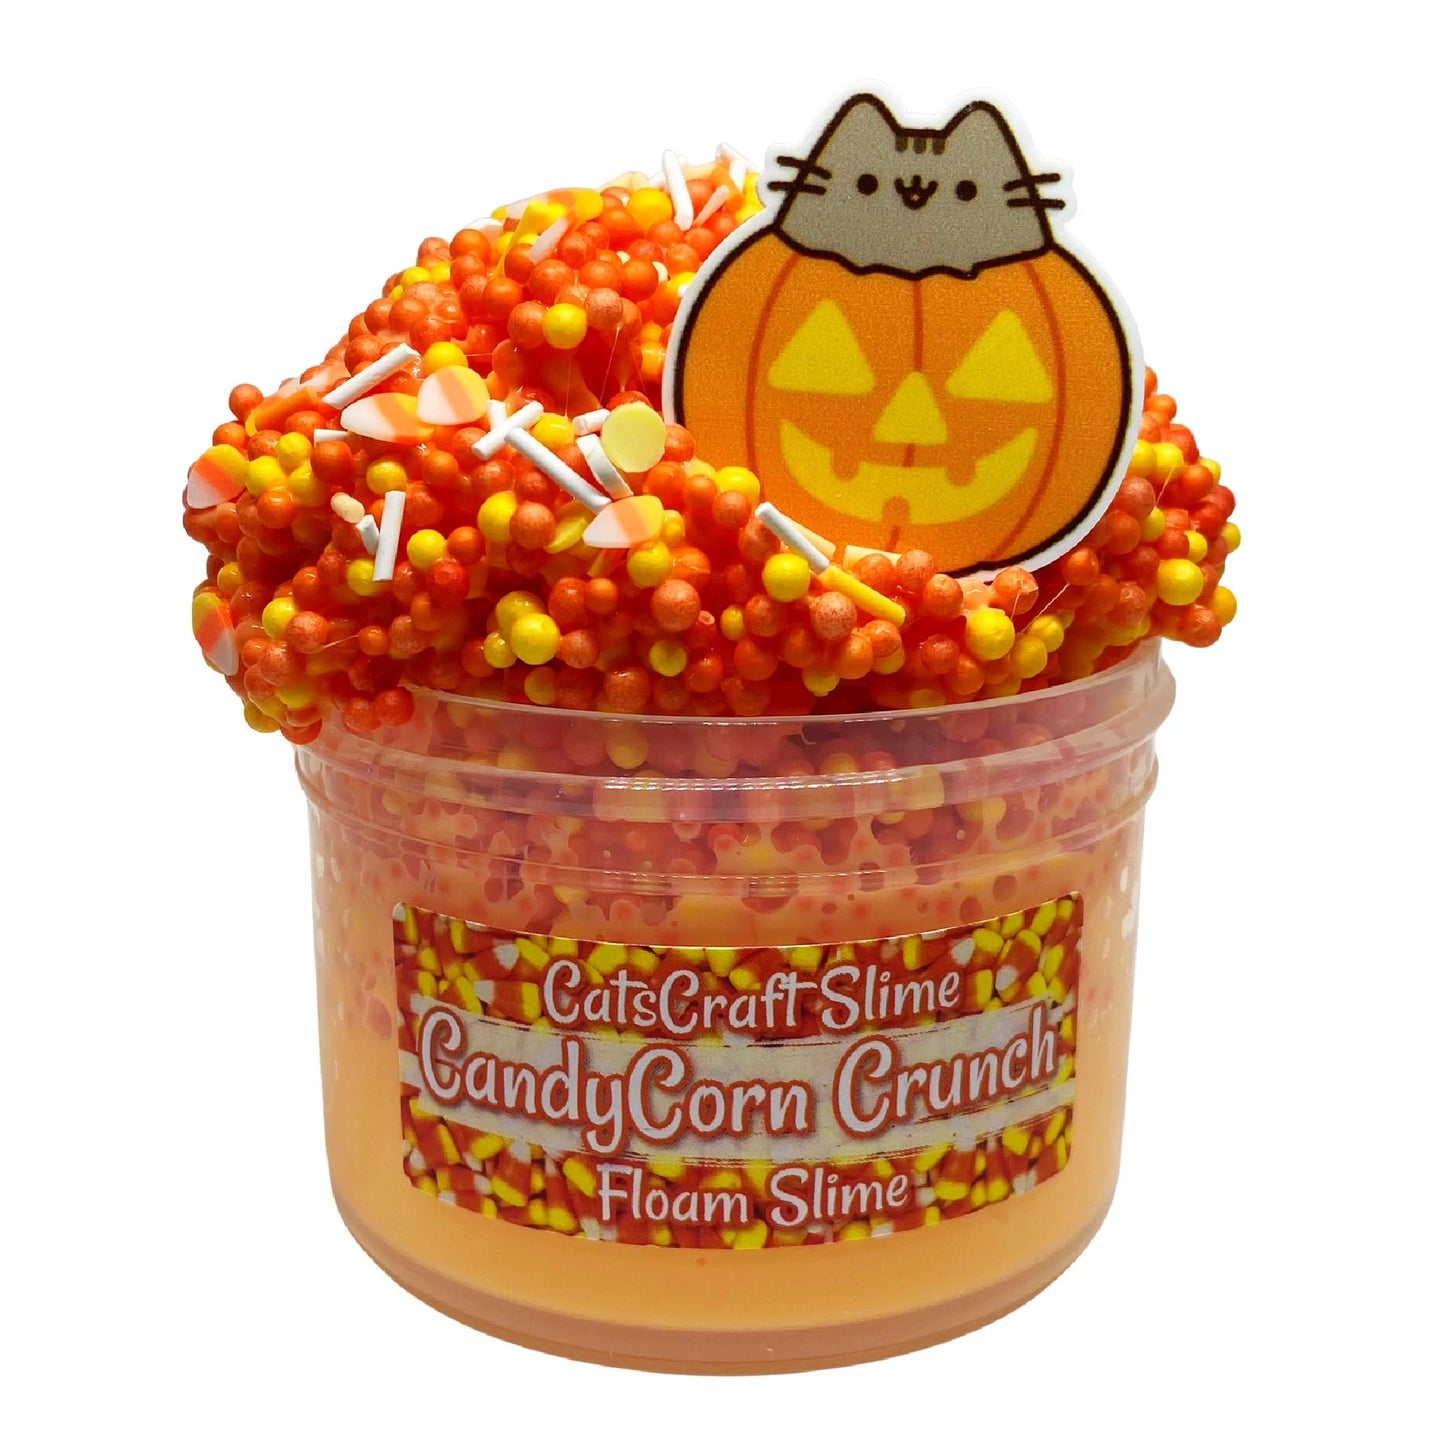 Full Floam Slime "Candycorn Crunch" SCENTED crunchy ASMR foam beads Halloween slime with cat charm